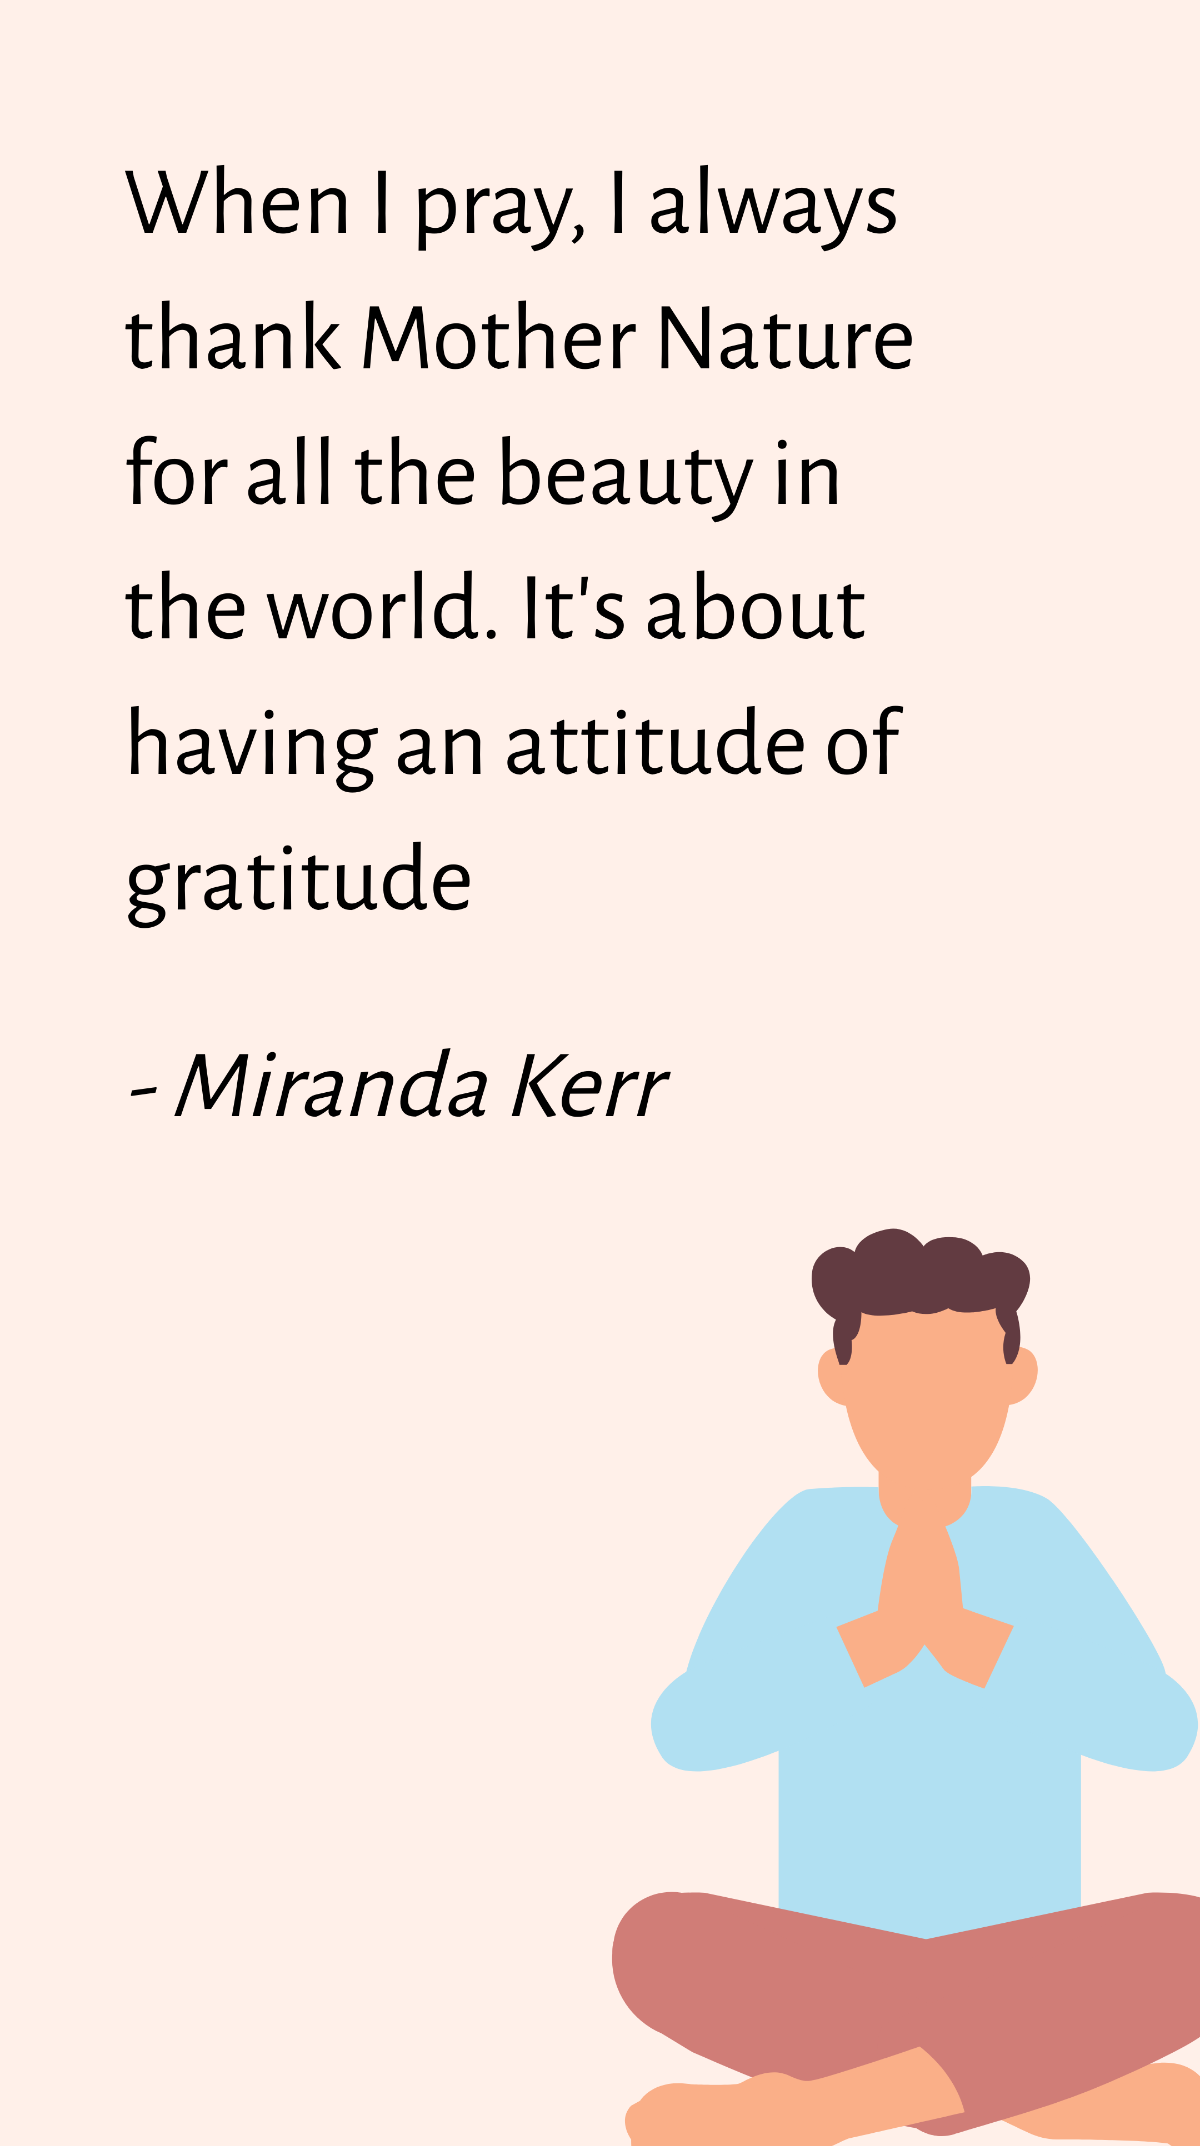 Free Miranda Kerr - When I pray, I always thank Mother Nature for all the beauty in the world. It's about having an attitude of gratitude Template